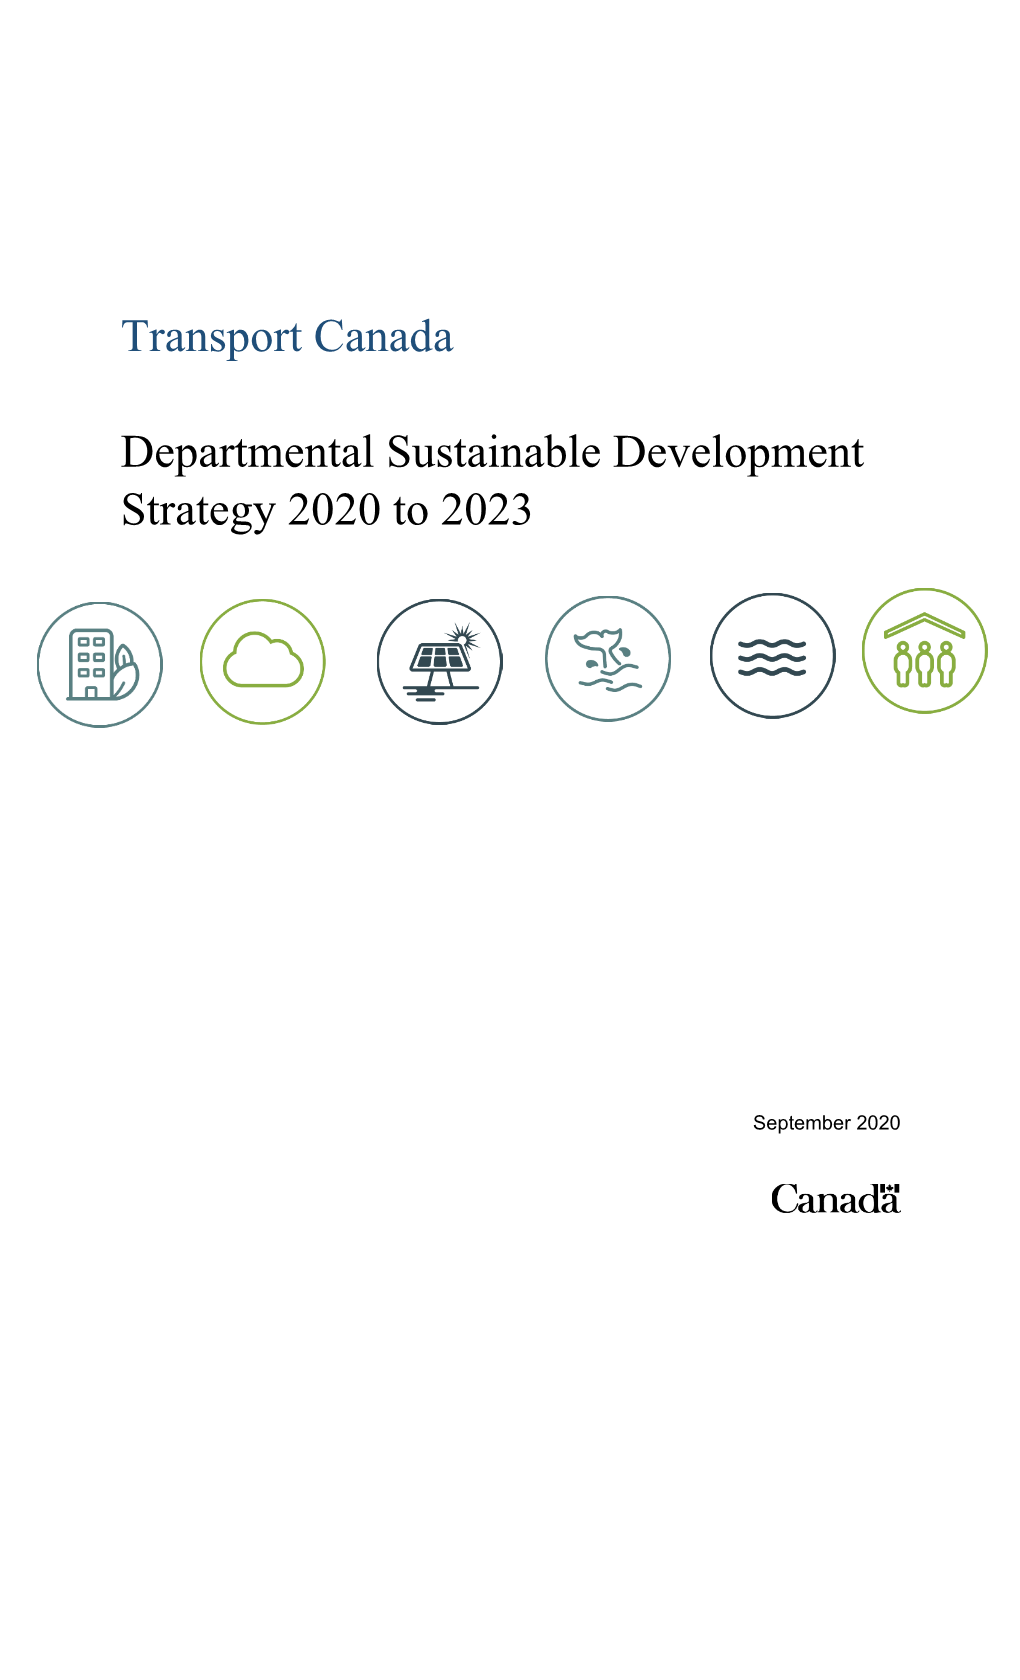 Transport Canada Departmental Sustainable Development Strategy